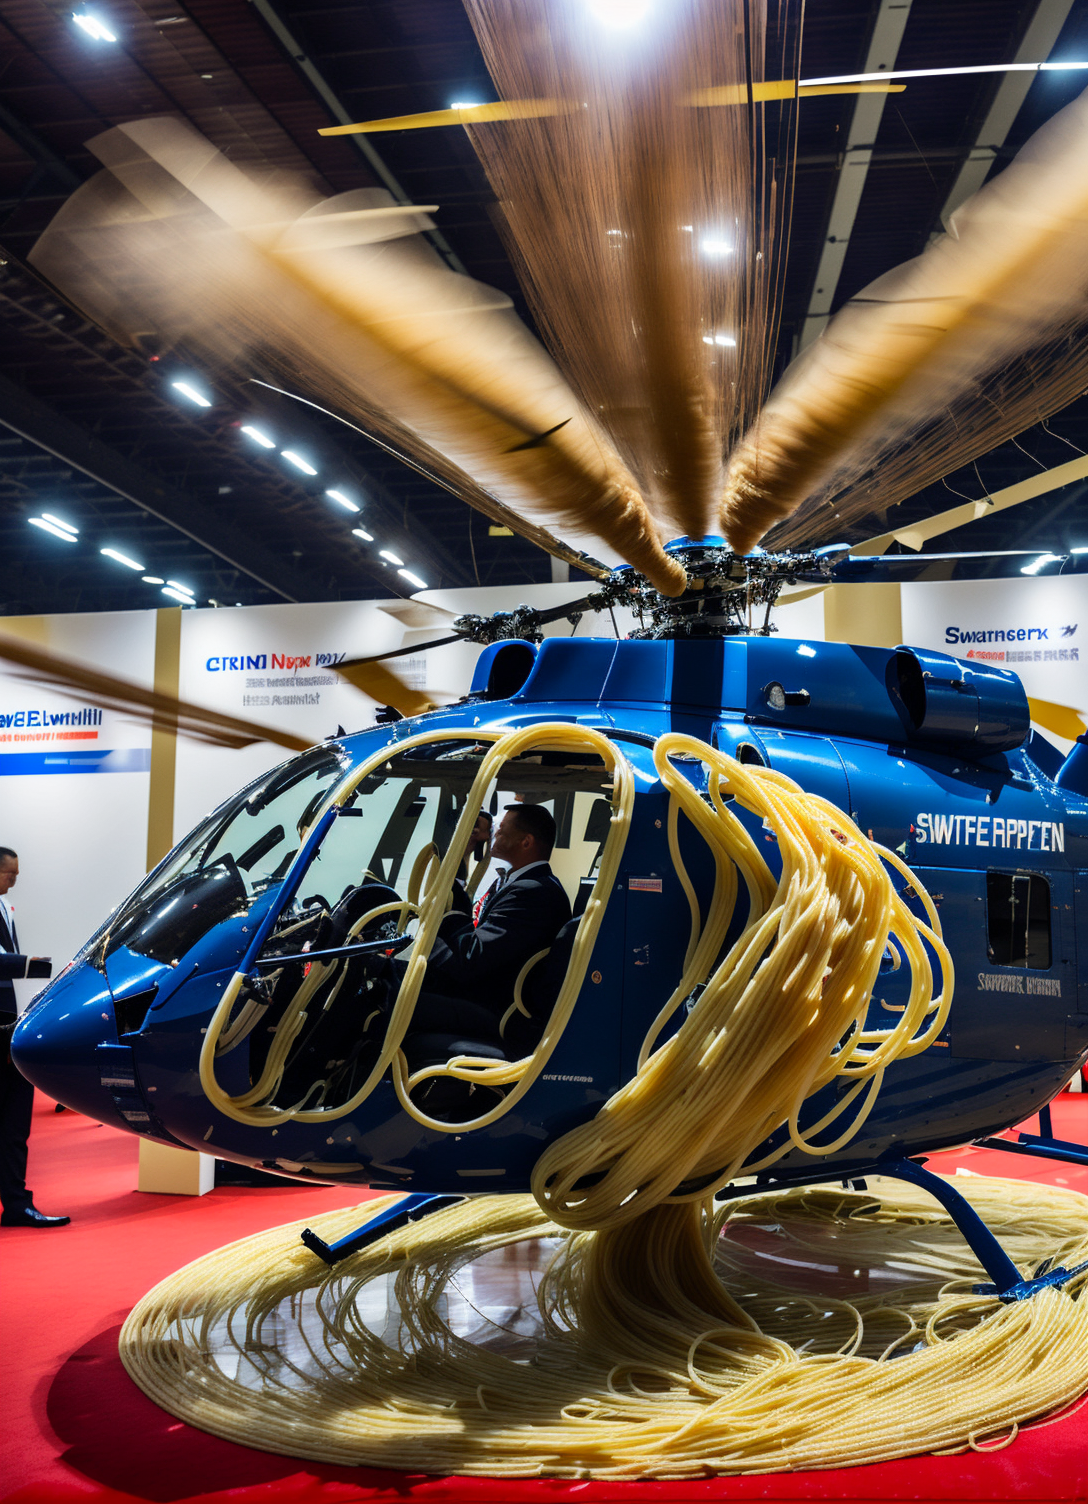 (photo:1.2) at a (busy defence expo event of a helicopter) that uses (swirling spaghetti:1.2) to thrust air. it doesn't fl...